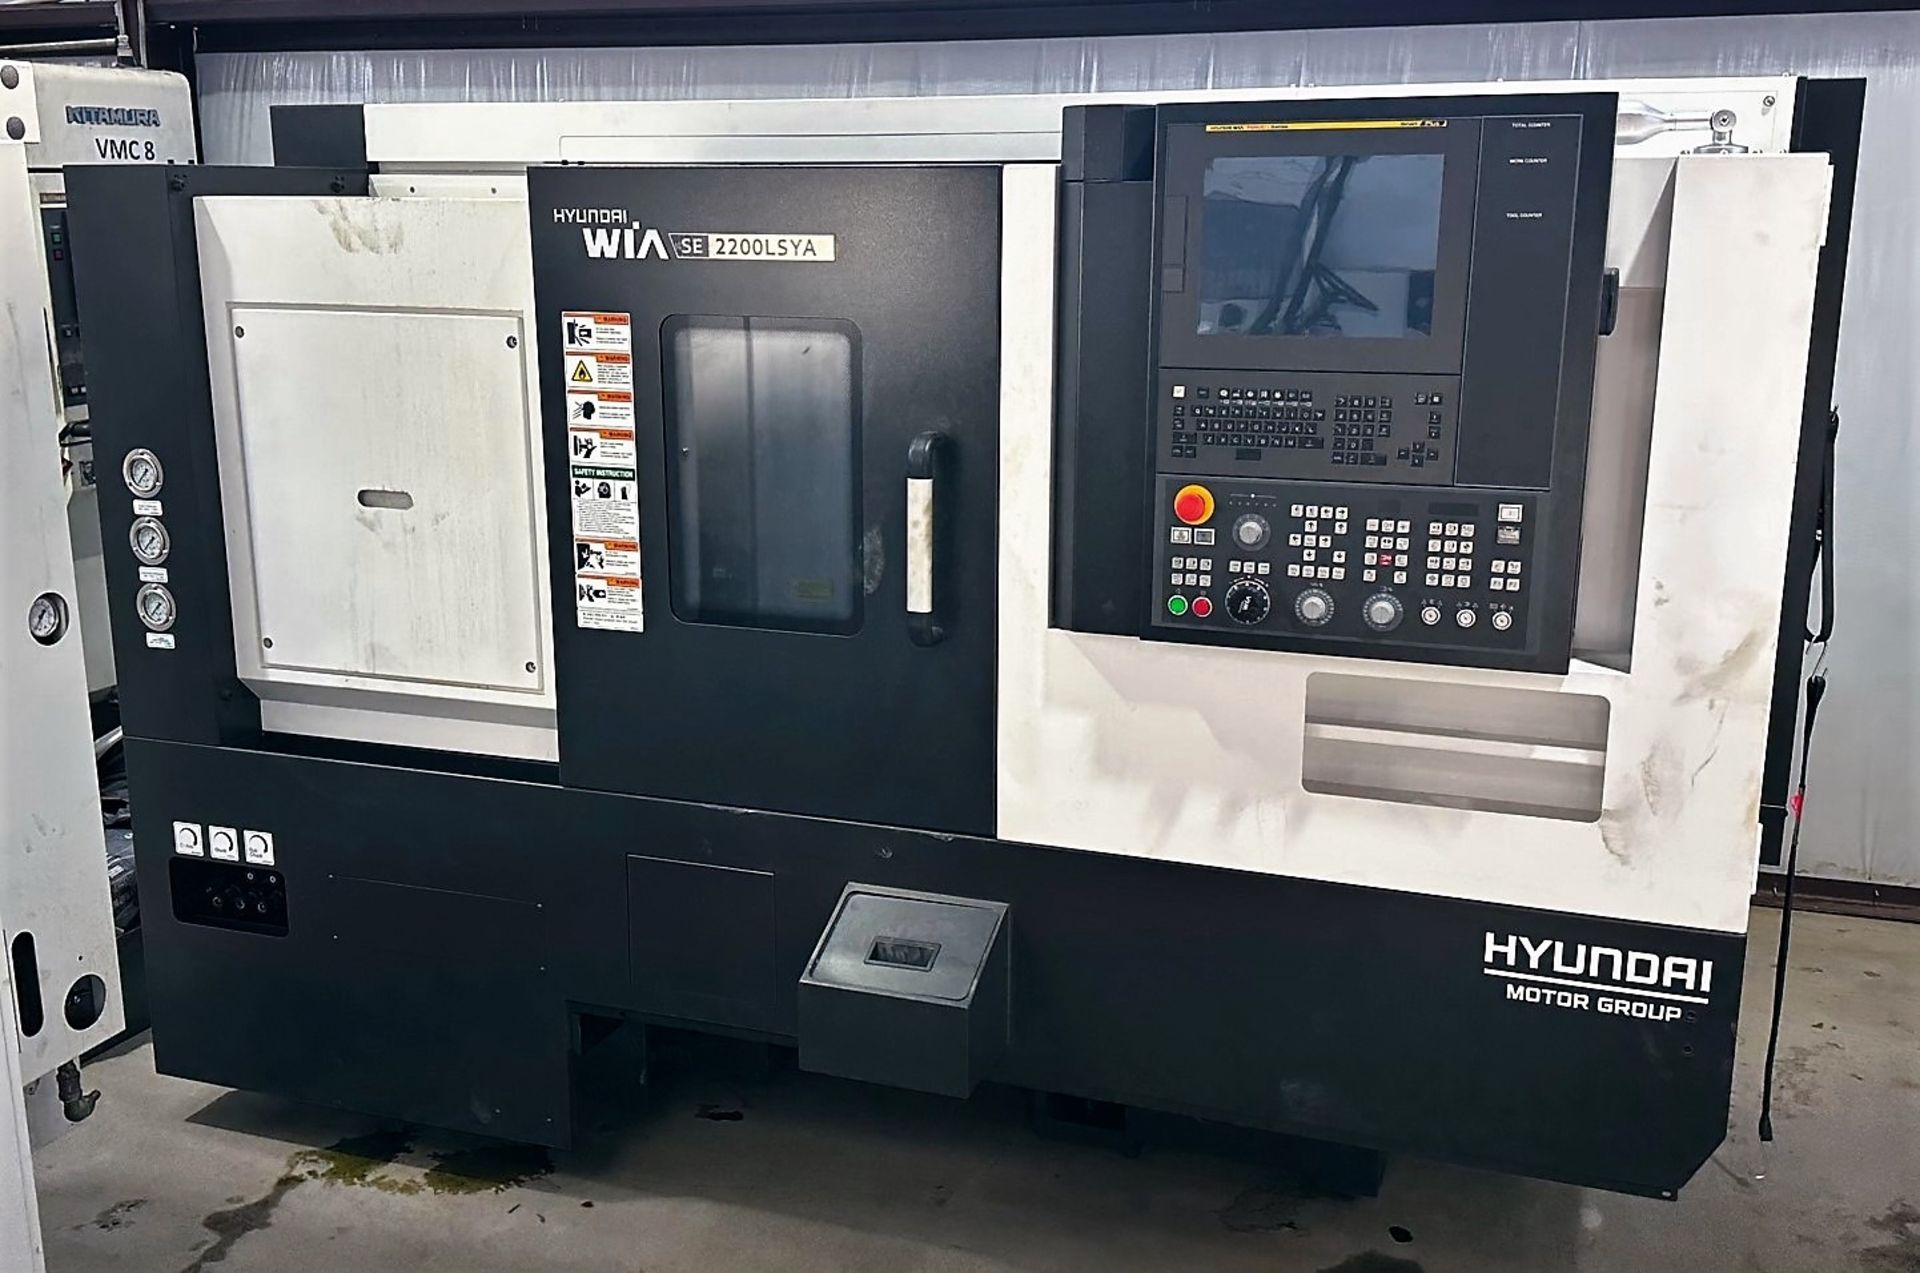 HYUNDAI WIA SE2200LSYA CNC TURNING CENTER, 2022 - Y AXIS, MILLING, SUB SPINDLE, 57 HOURS! - Image 9 of 10